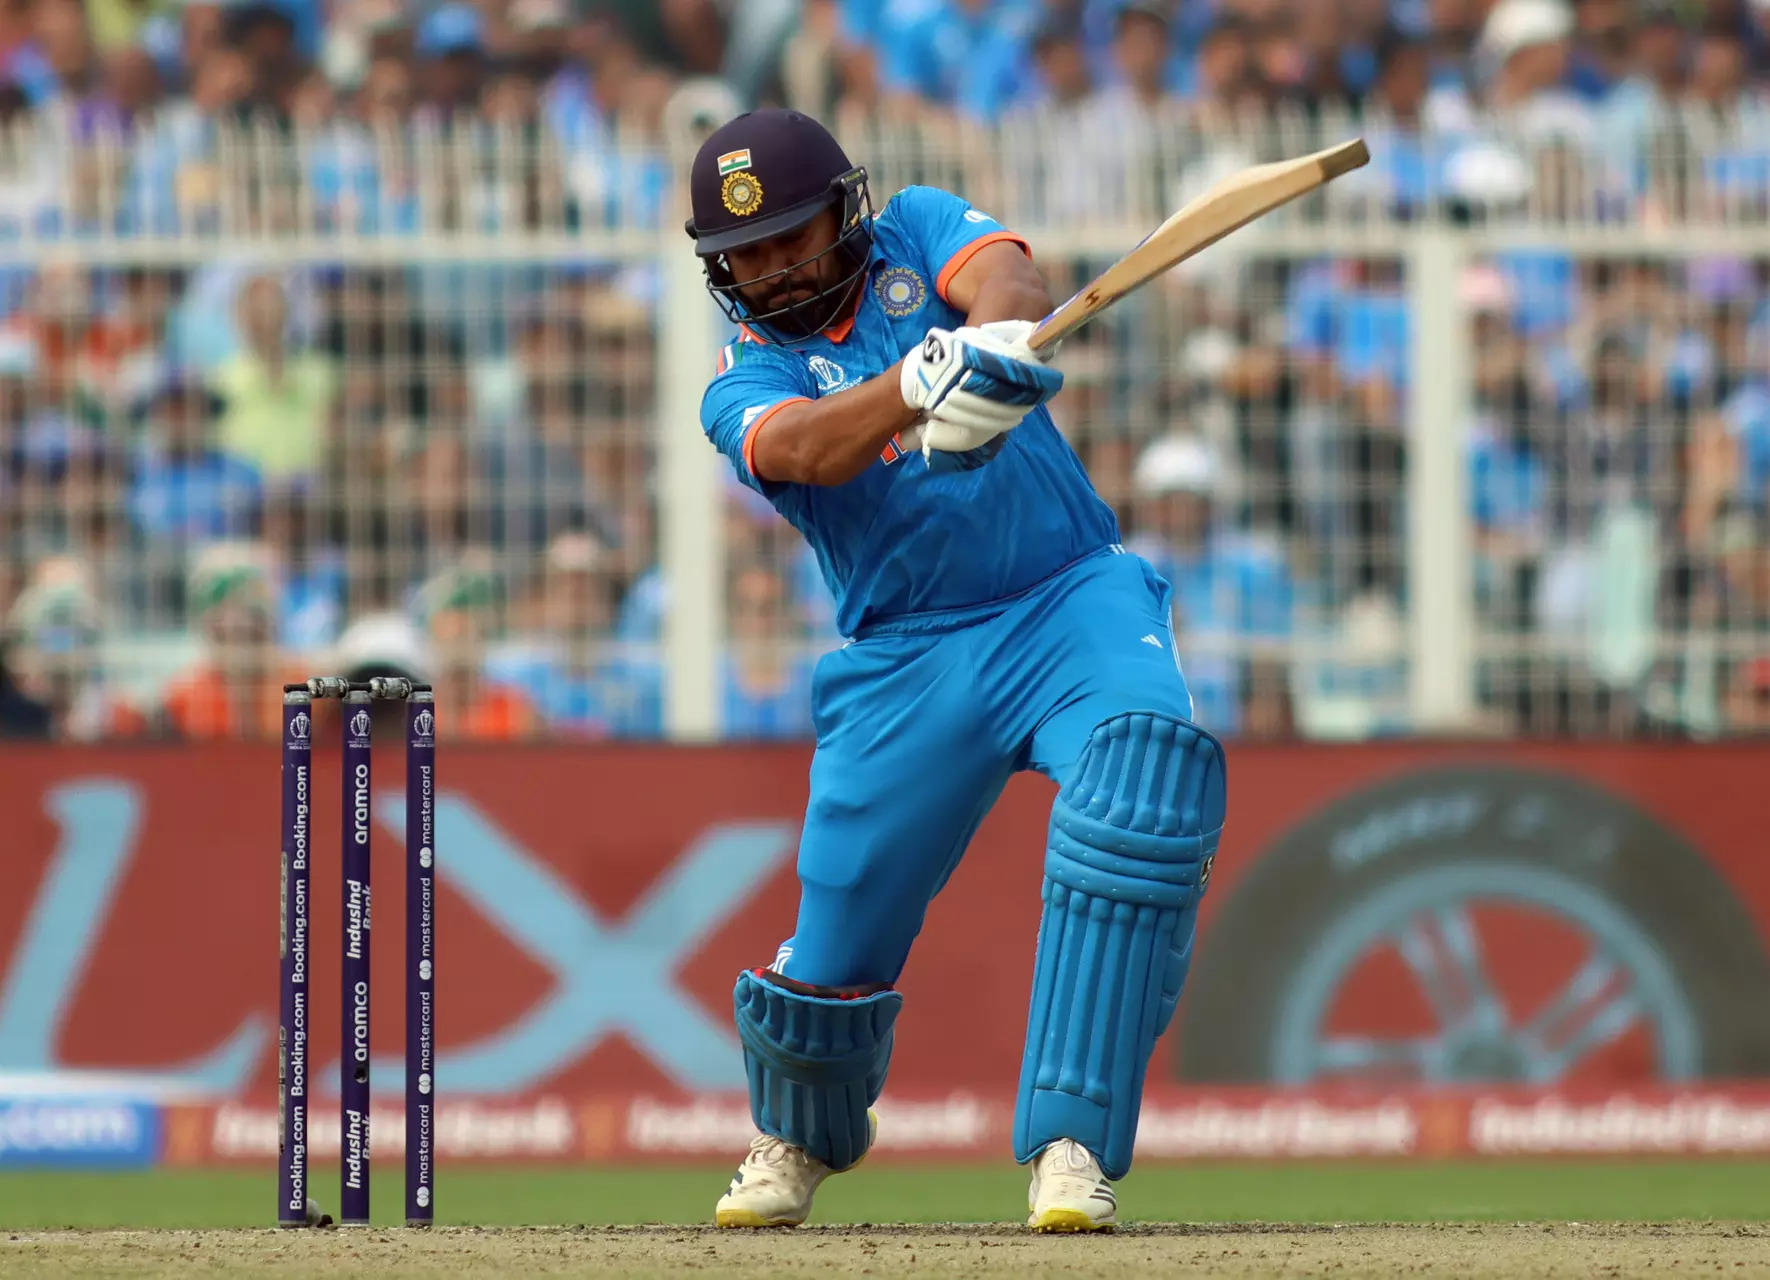 Rohit Sharma equals AB de Villiers record of most ODI sixes in a